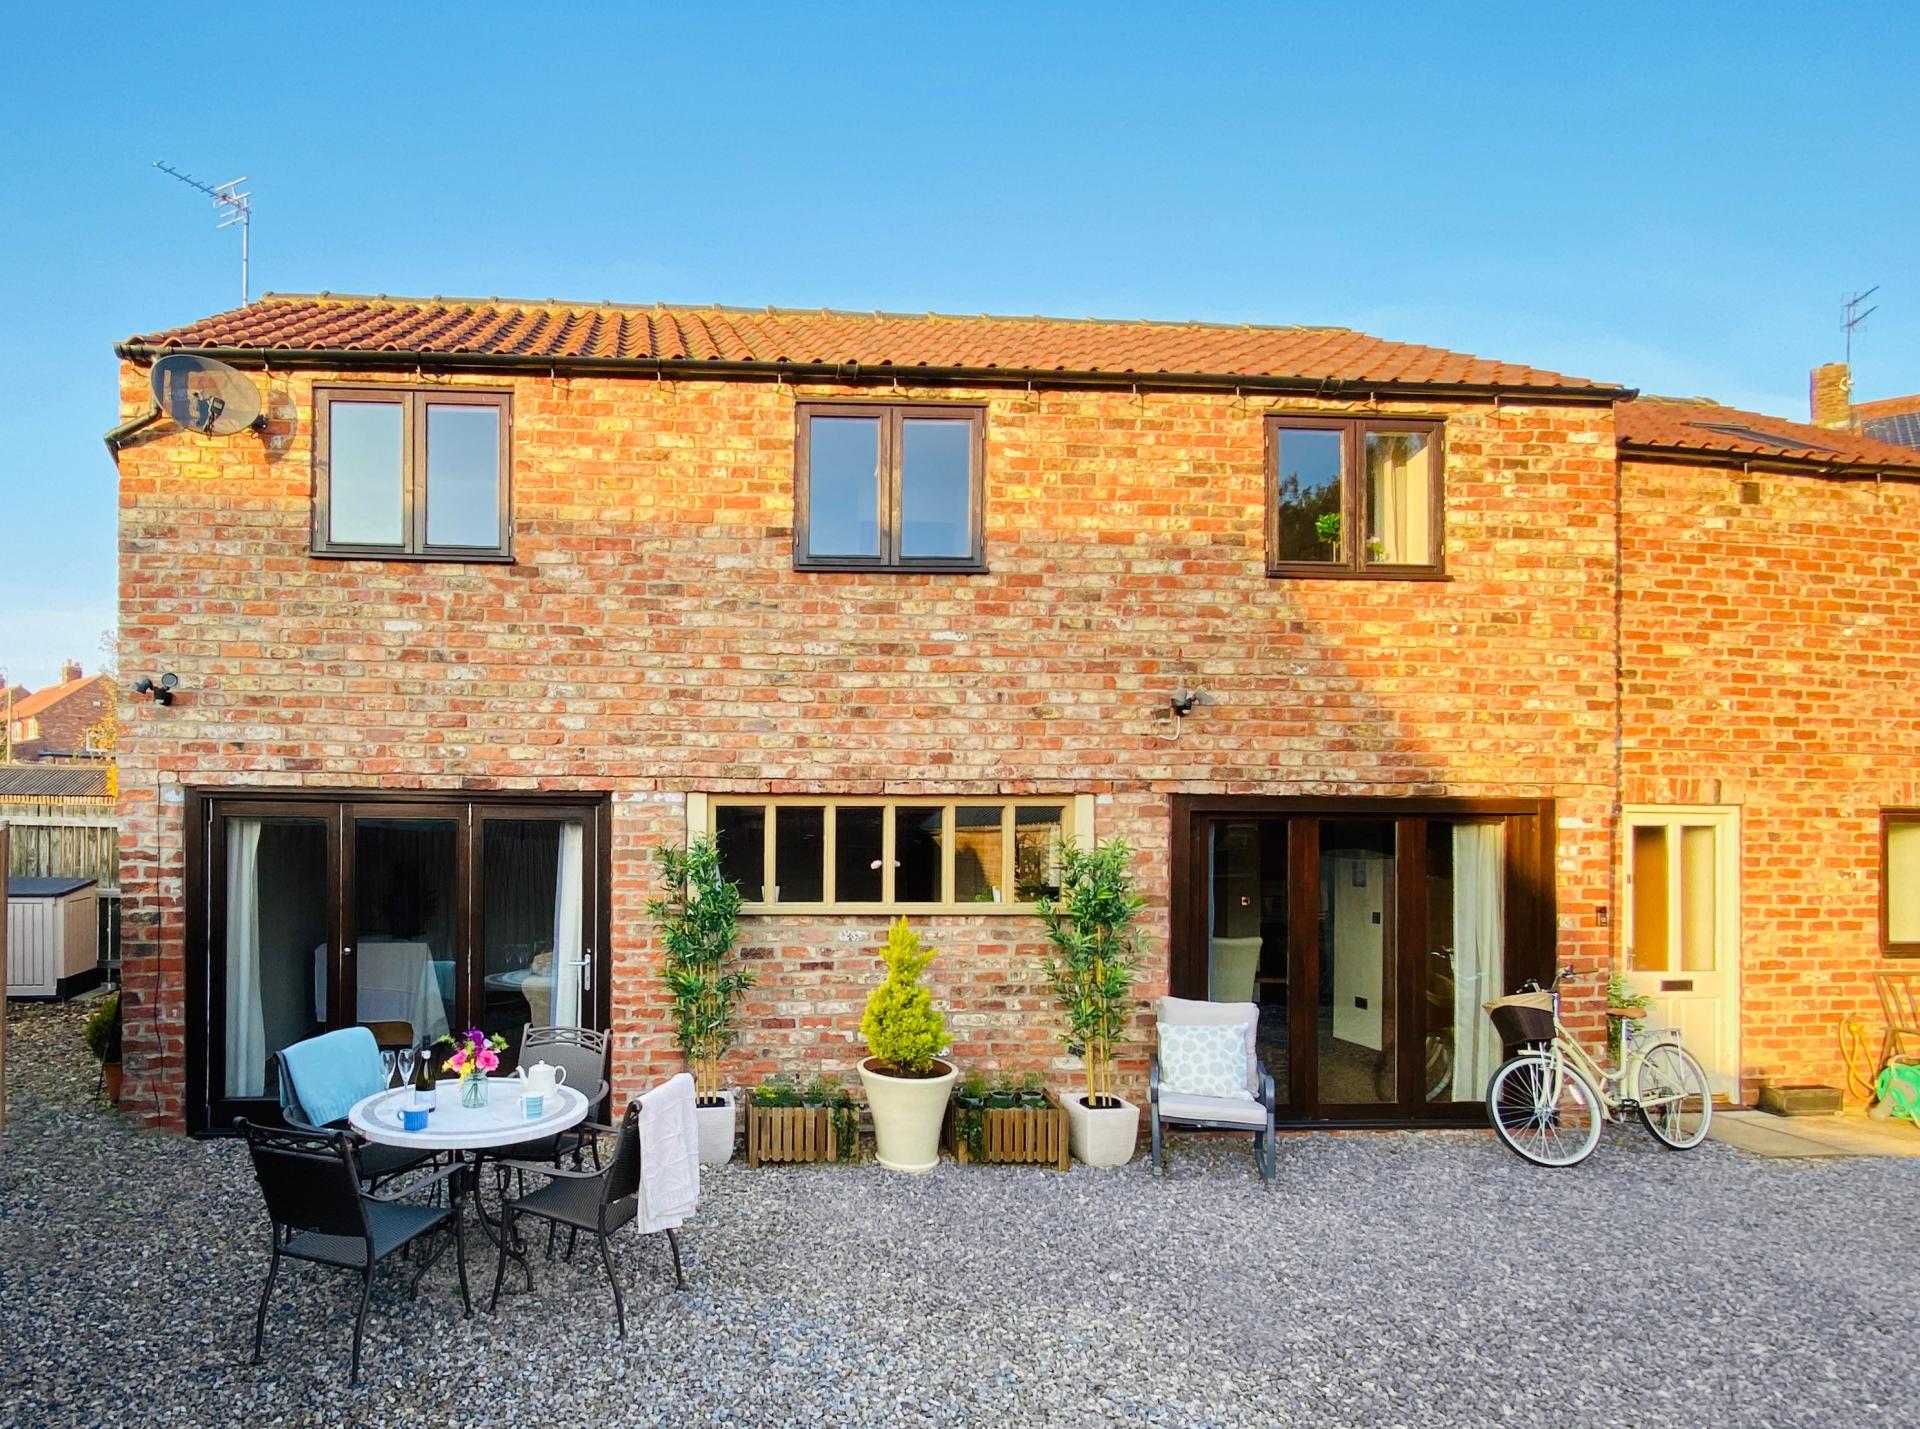 4 Bedroom Barn Conversion For Sale In North Yorkshire